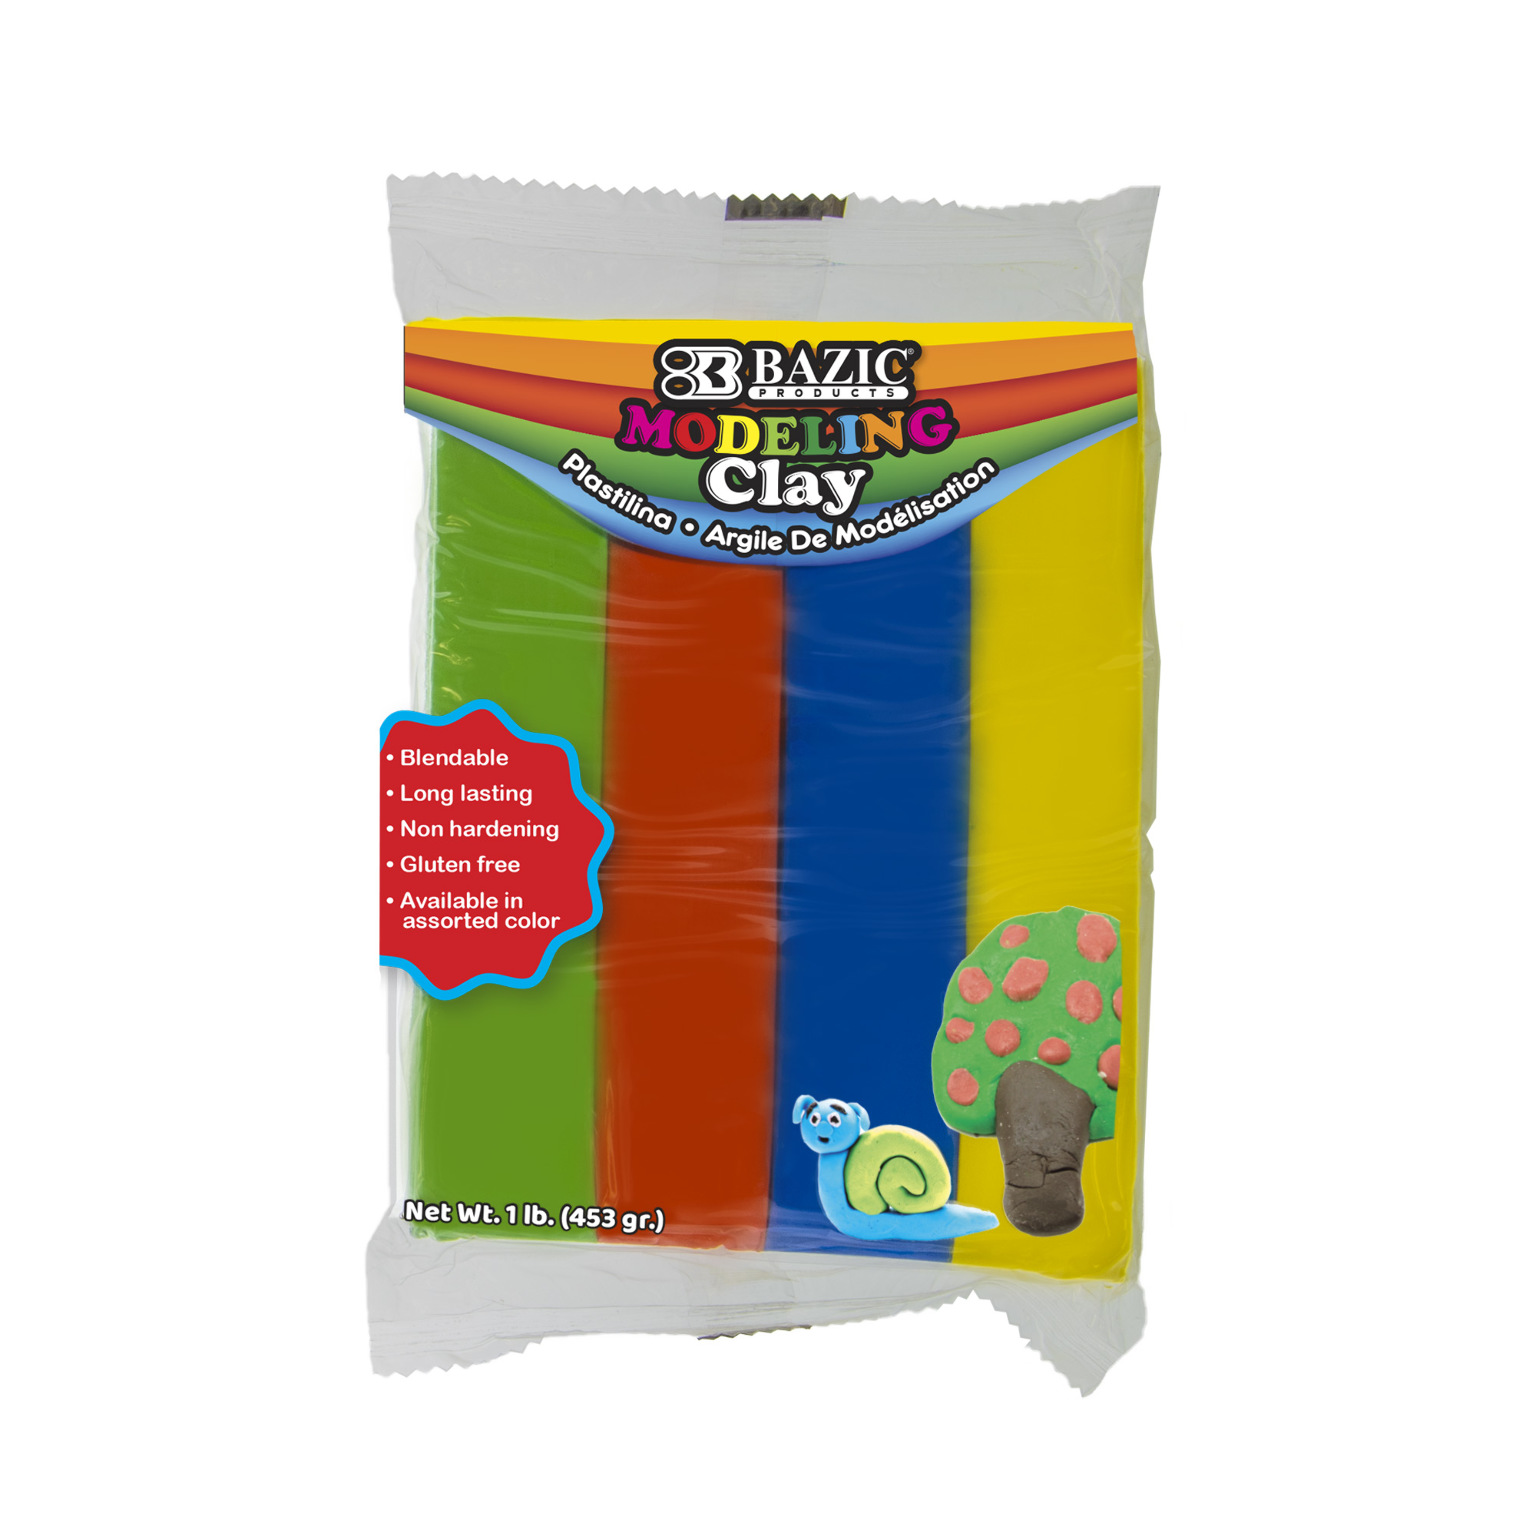 Air Dry Clay, Bulk Clay, 5 lb Storage Container